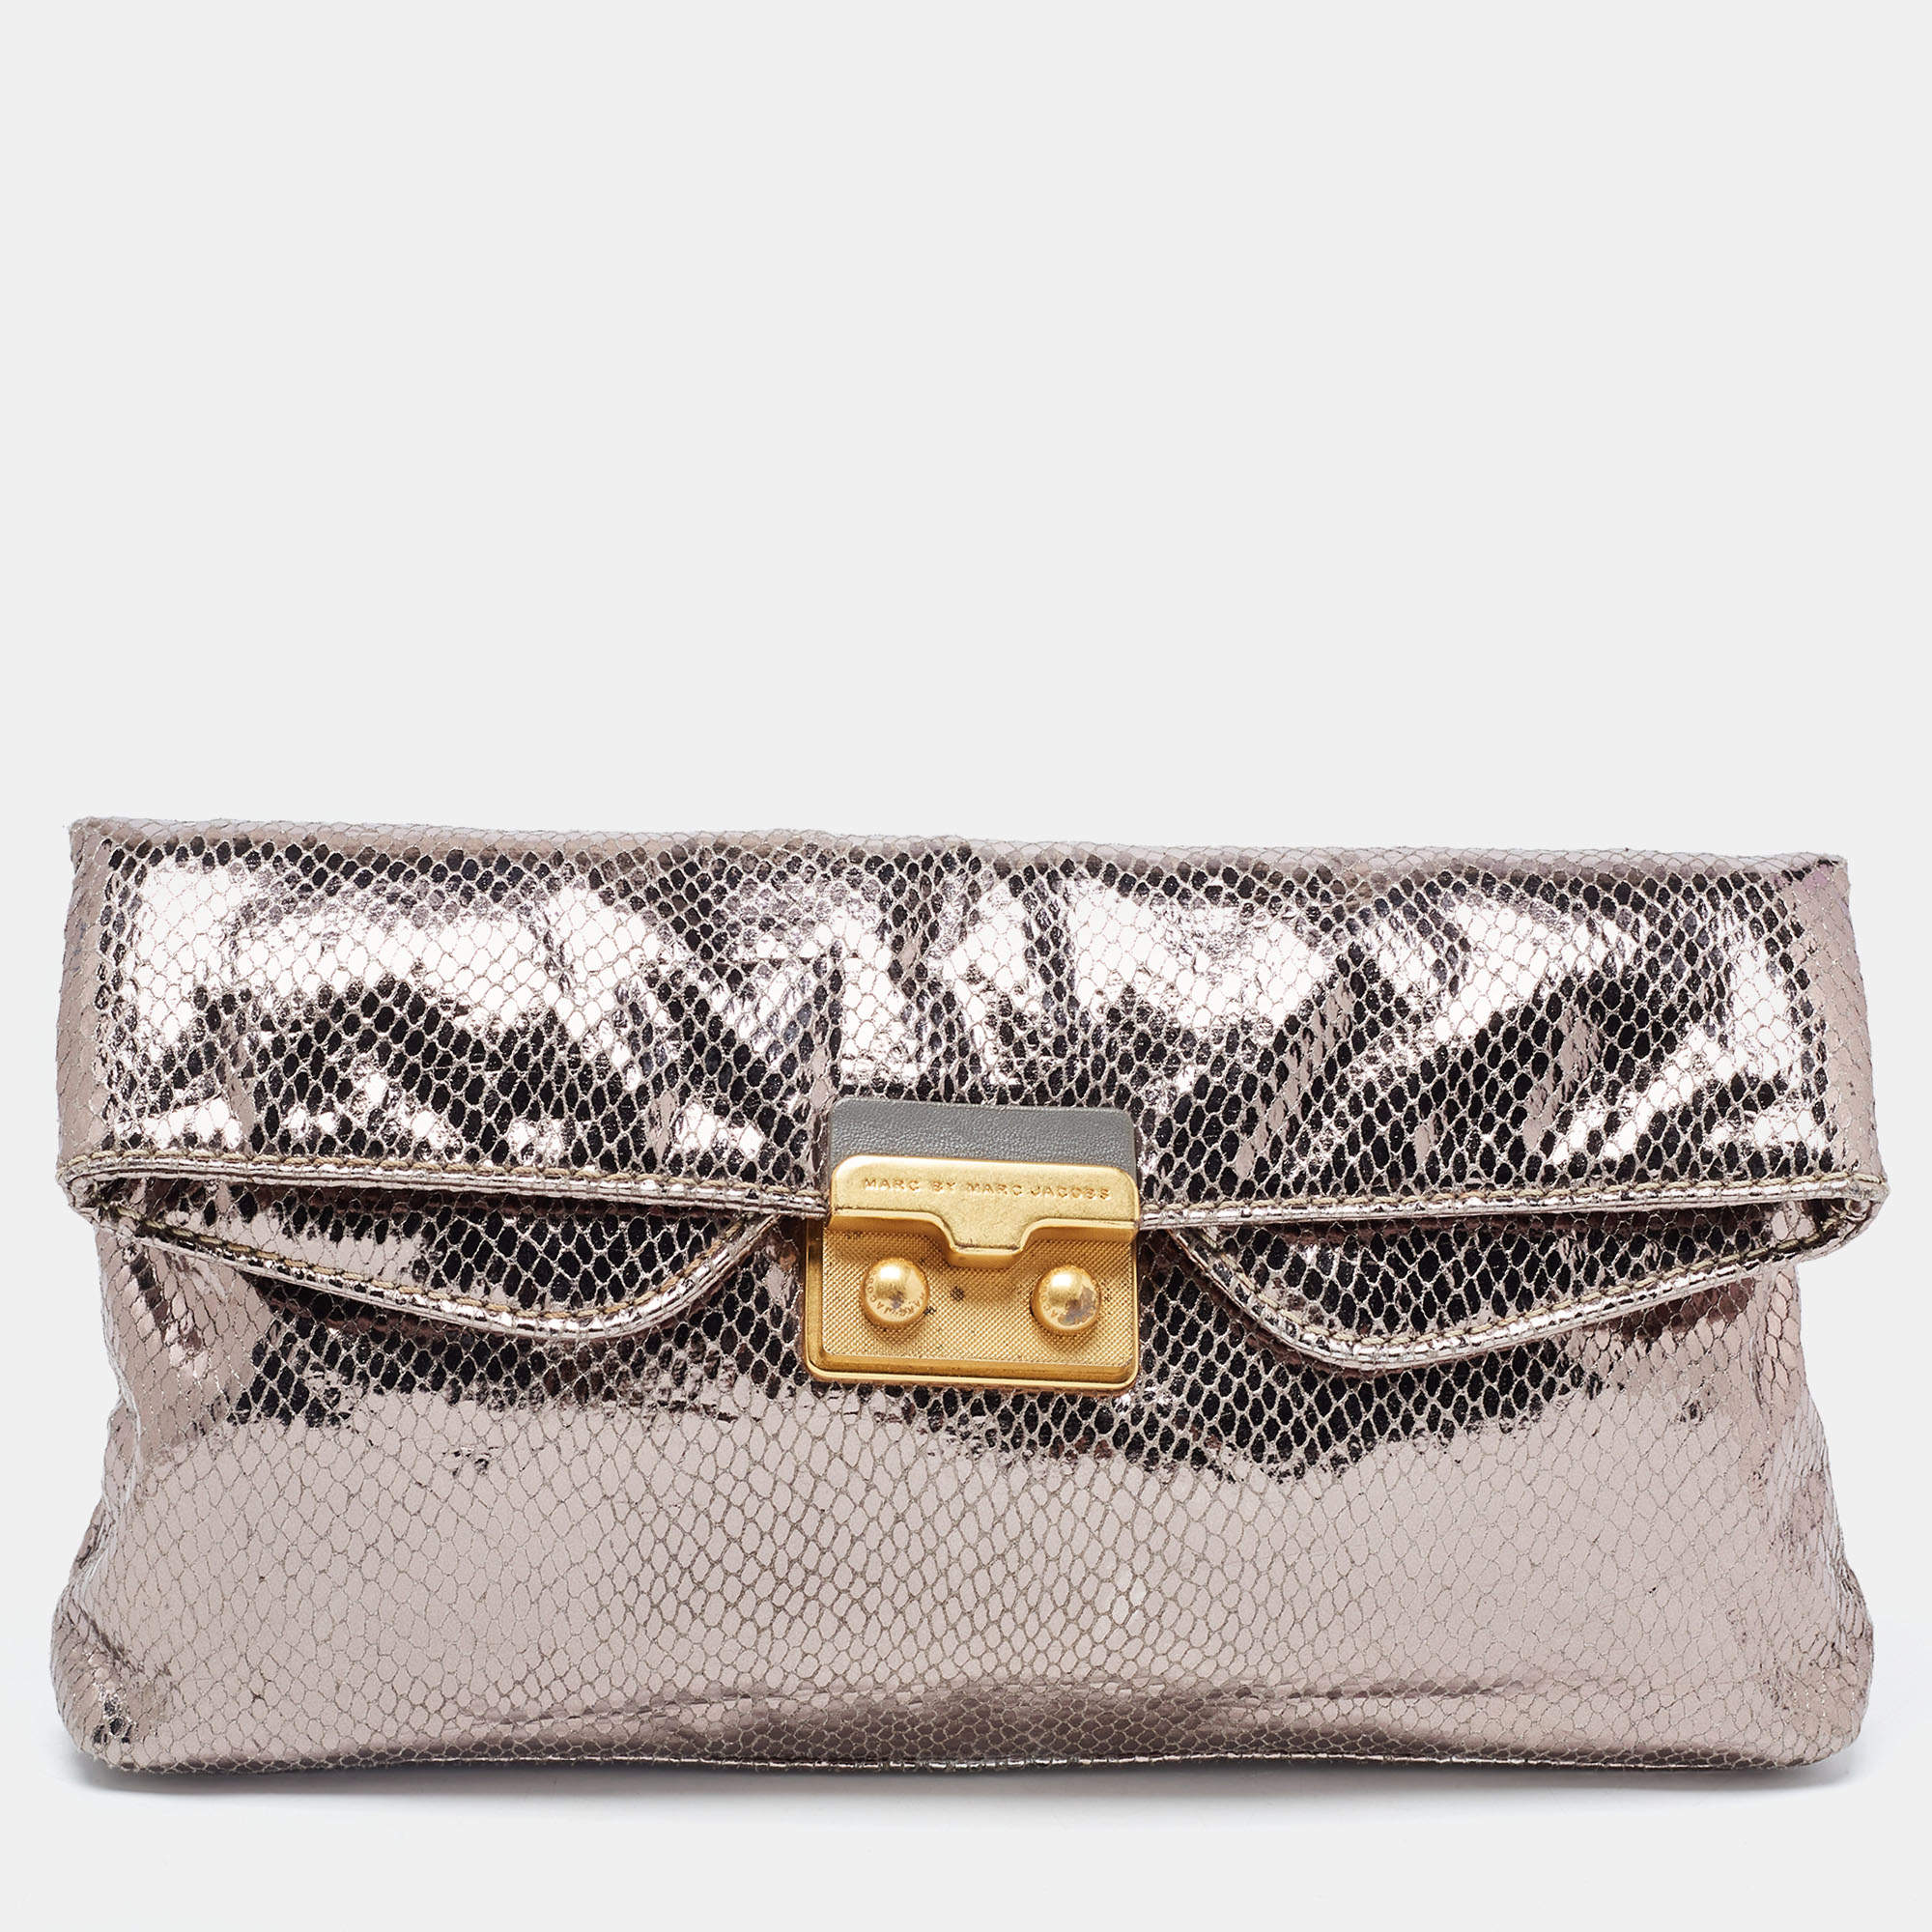 Marc by Marc Jacobs Metallic Silver Snakeskin Embossed Leather